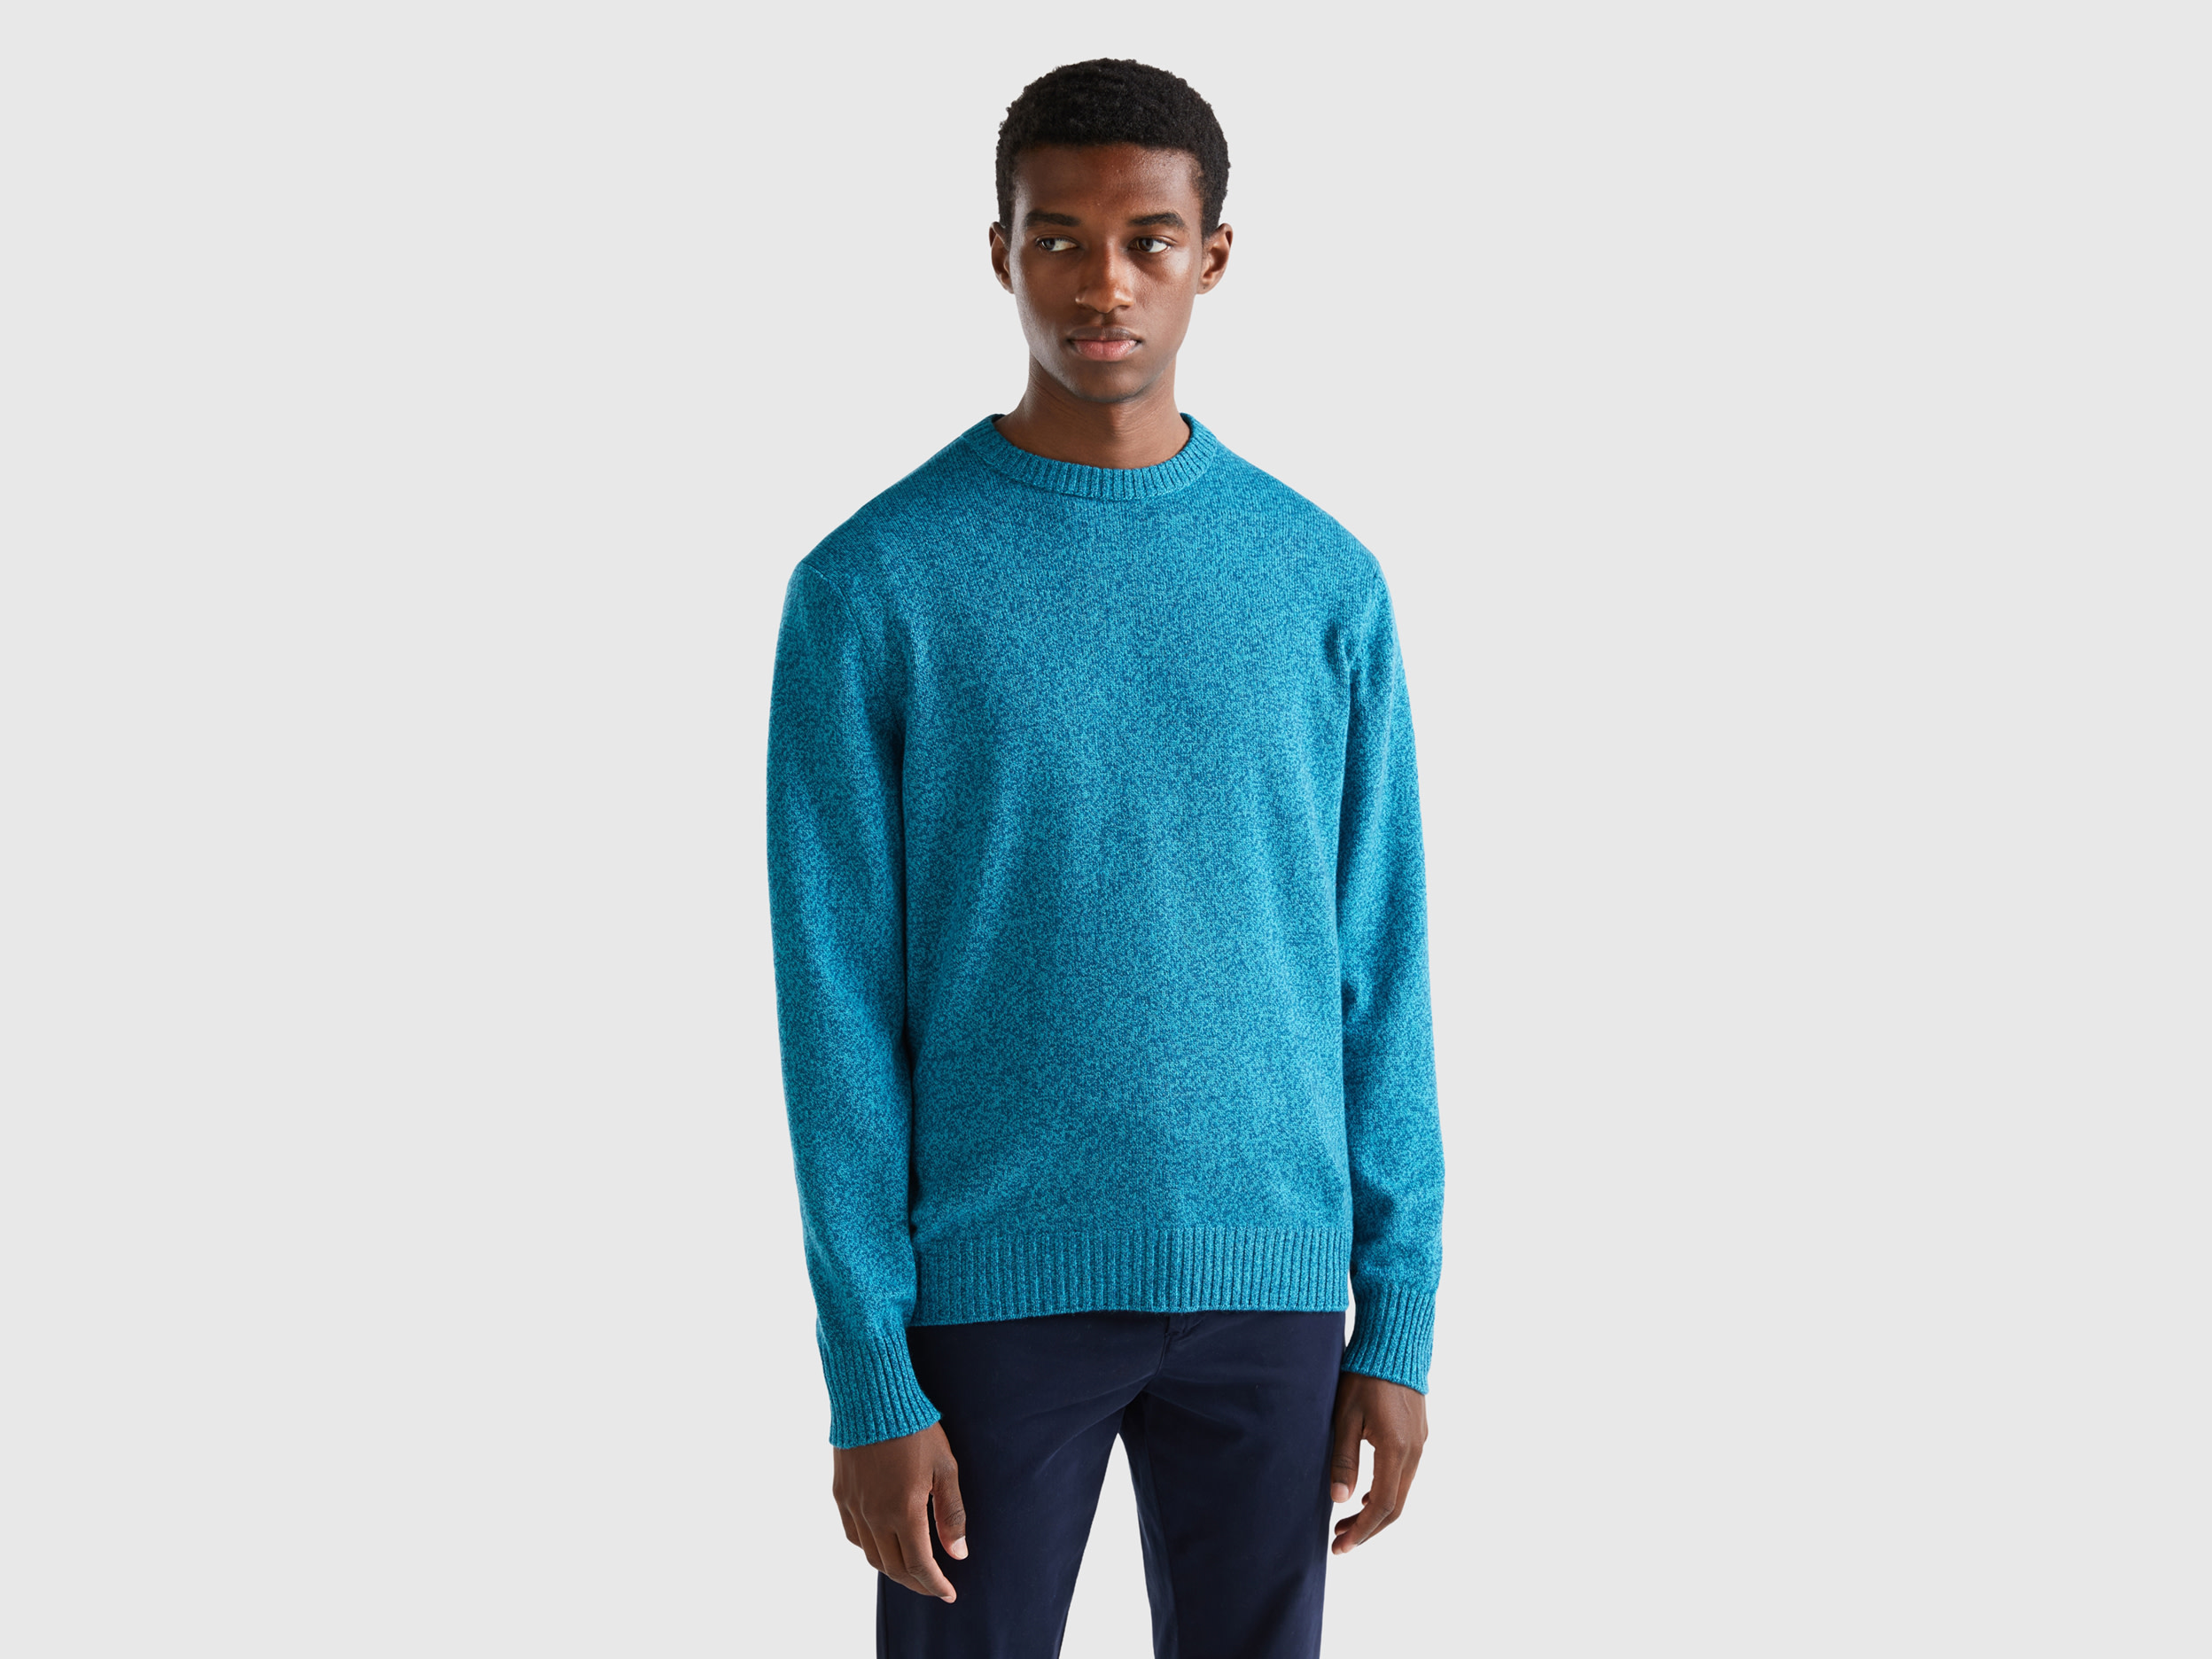 Benetton, Crew Neck Sweater In Cashmere And Wool Blend, size XXL, Blue, Men